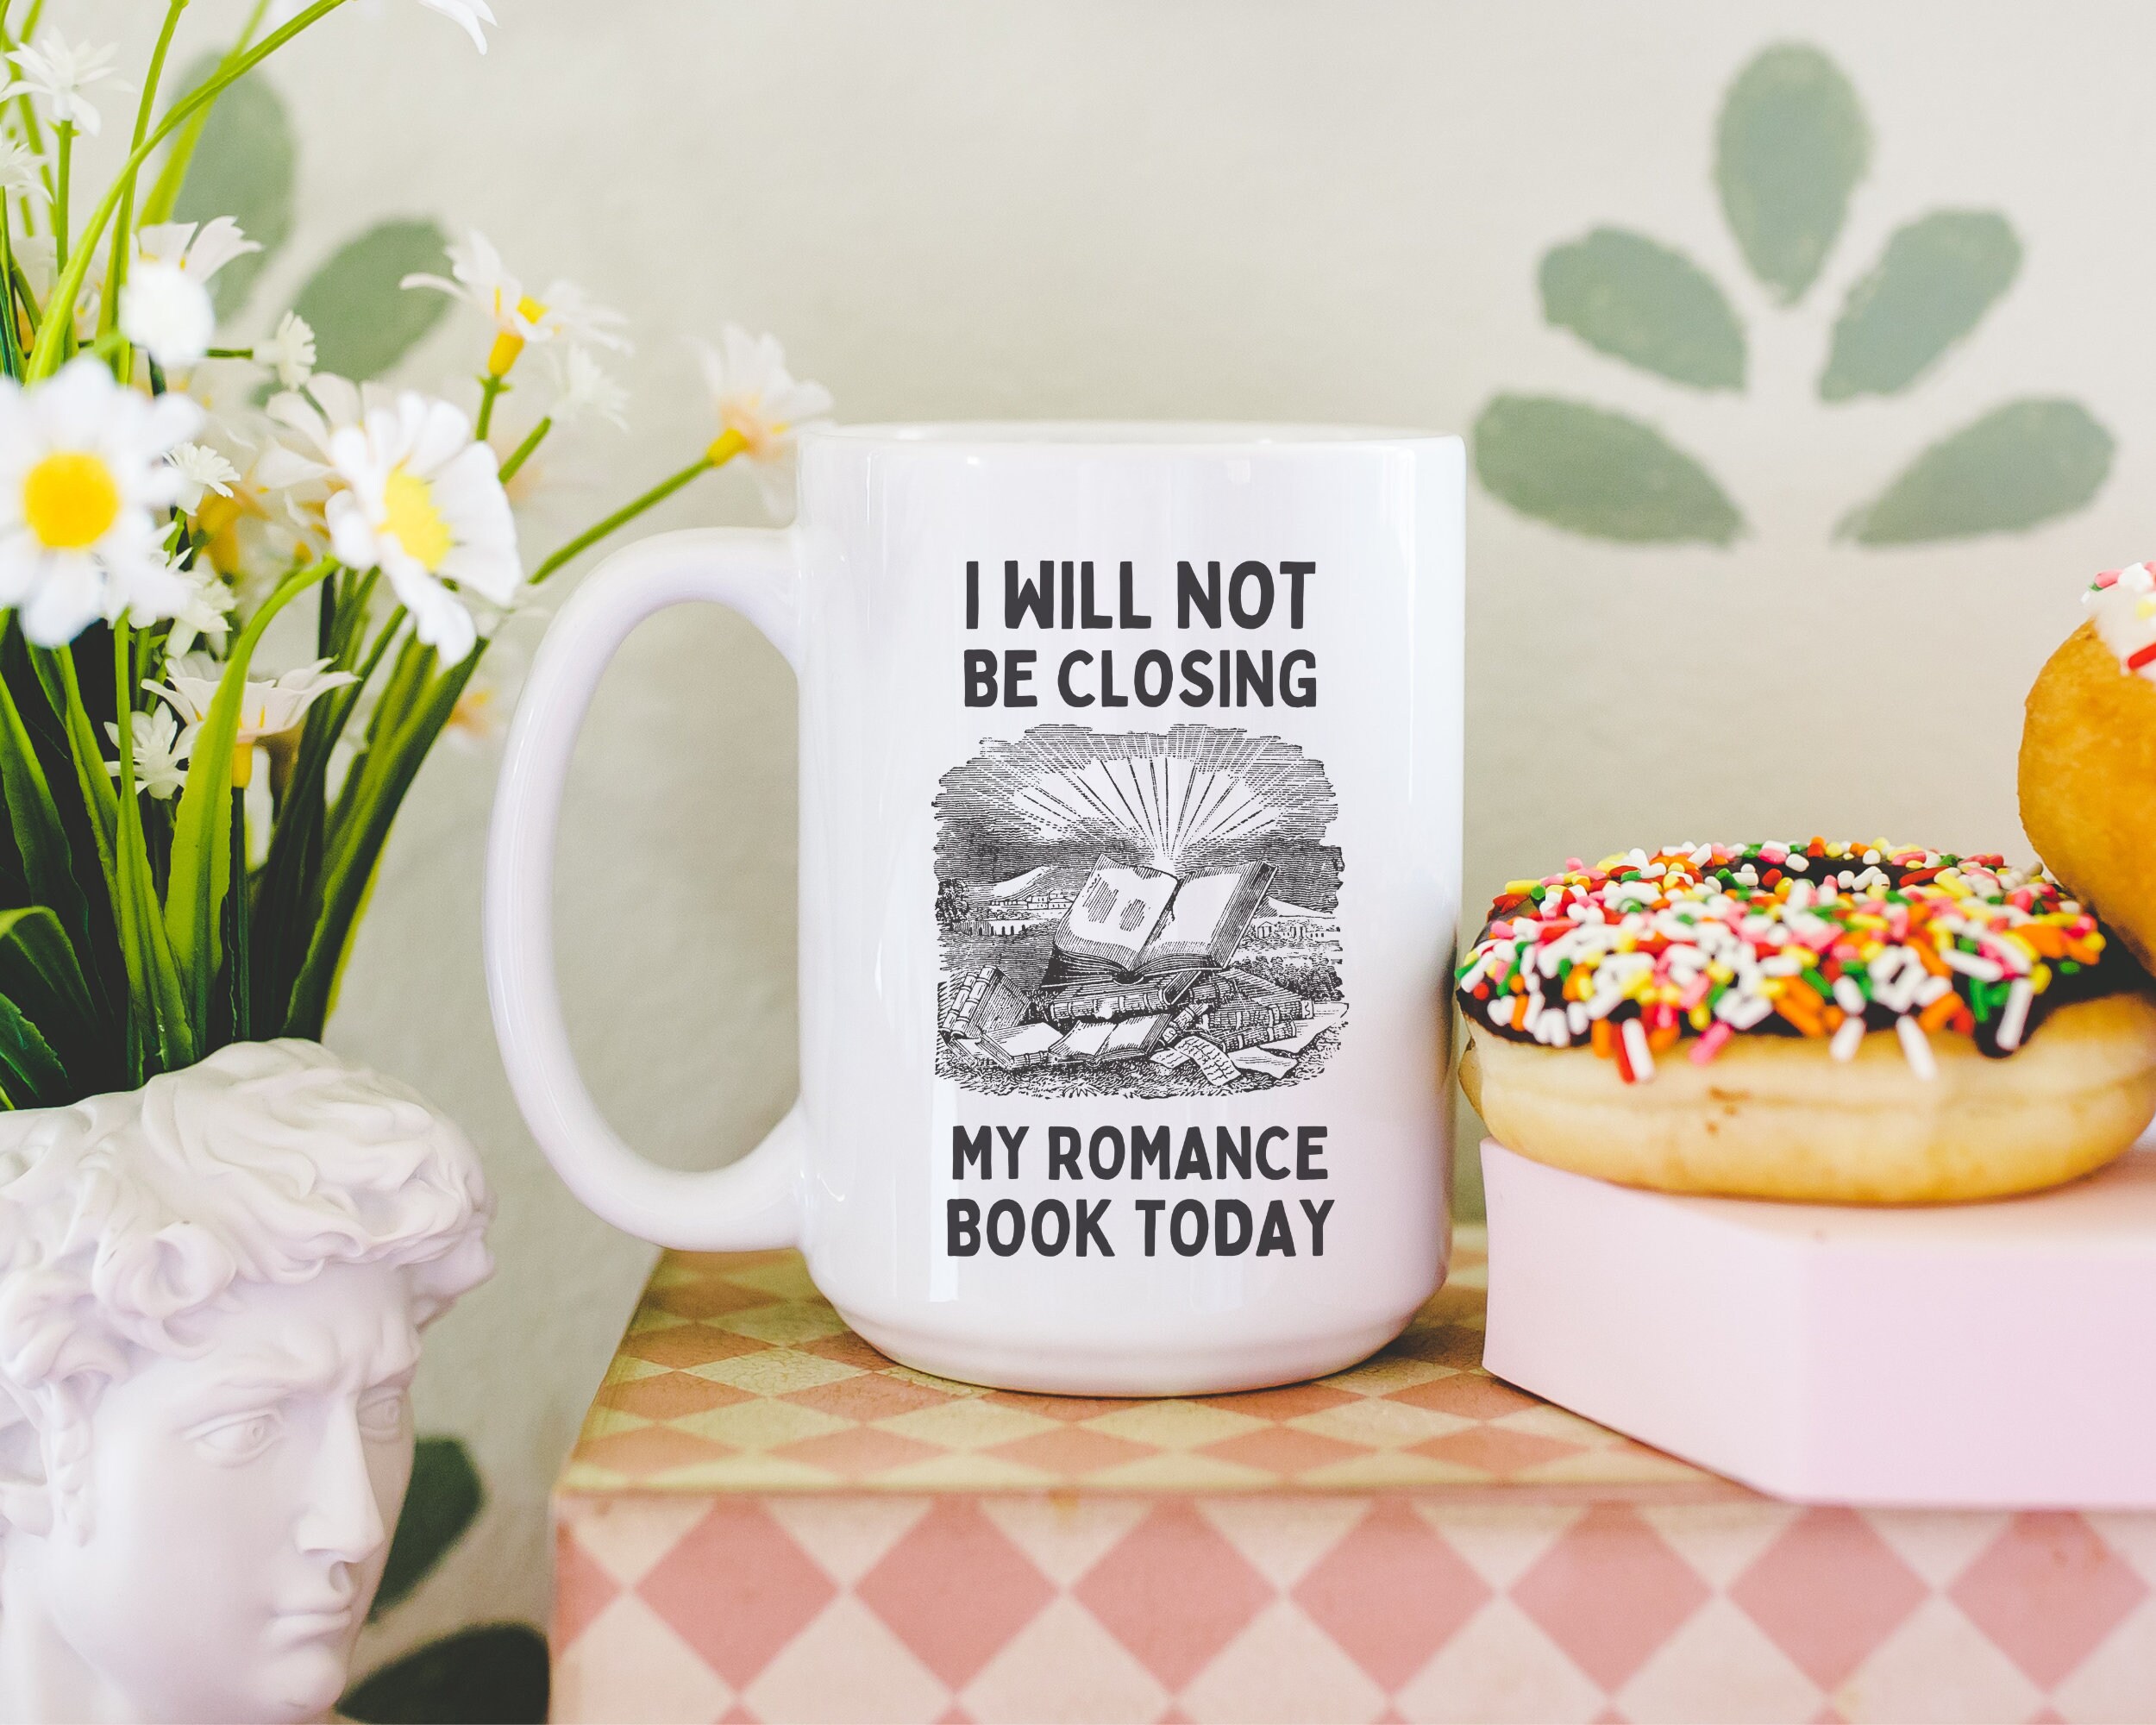 Gifts For Writers, Gifts For Authors, Presents For Writers, Literary Gifts,  Writing Theme, Book Lovers, Funny Mug, Novelty Mug